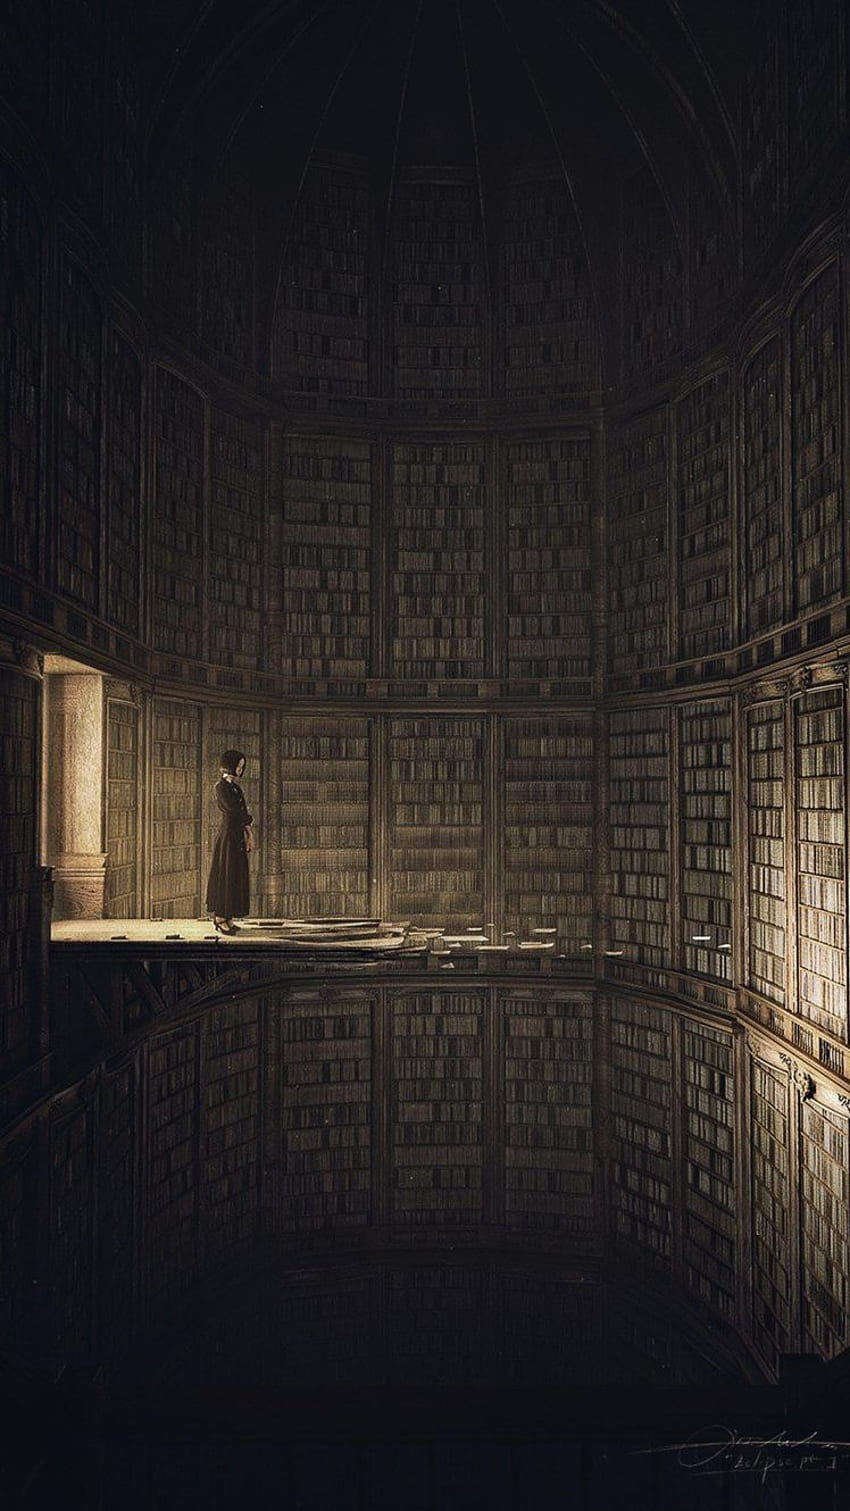 A person standing in a library with bookshelves - Library